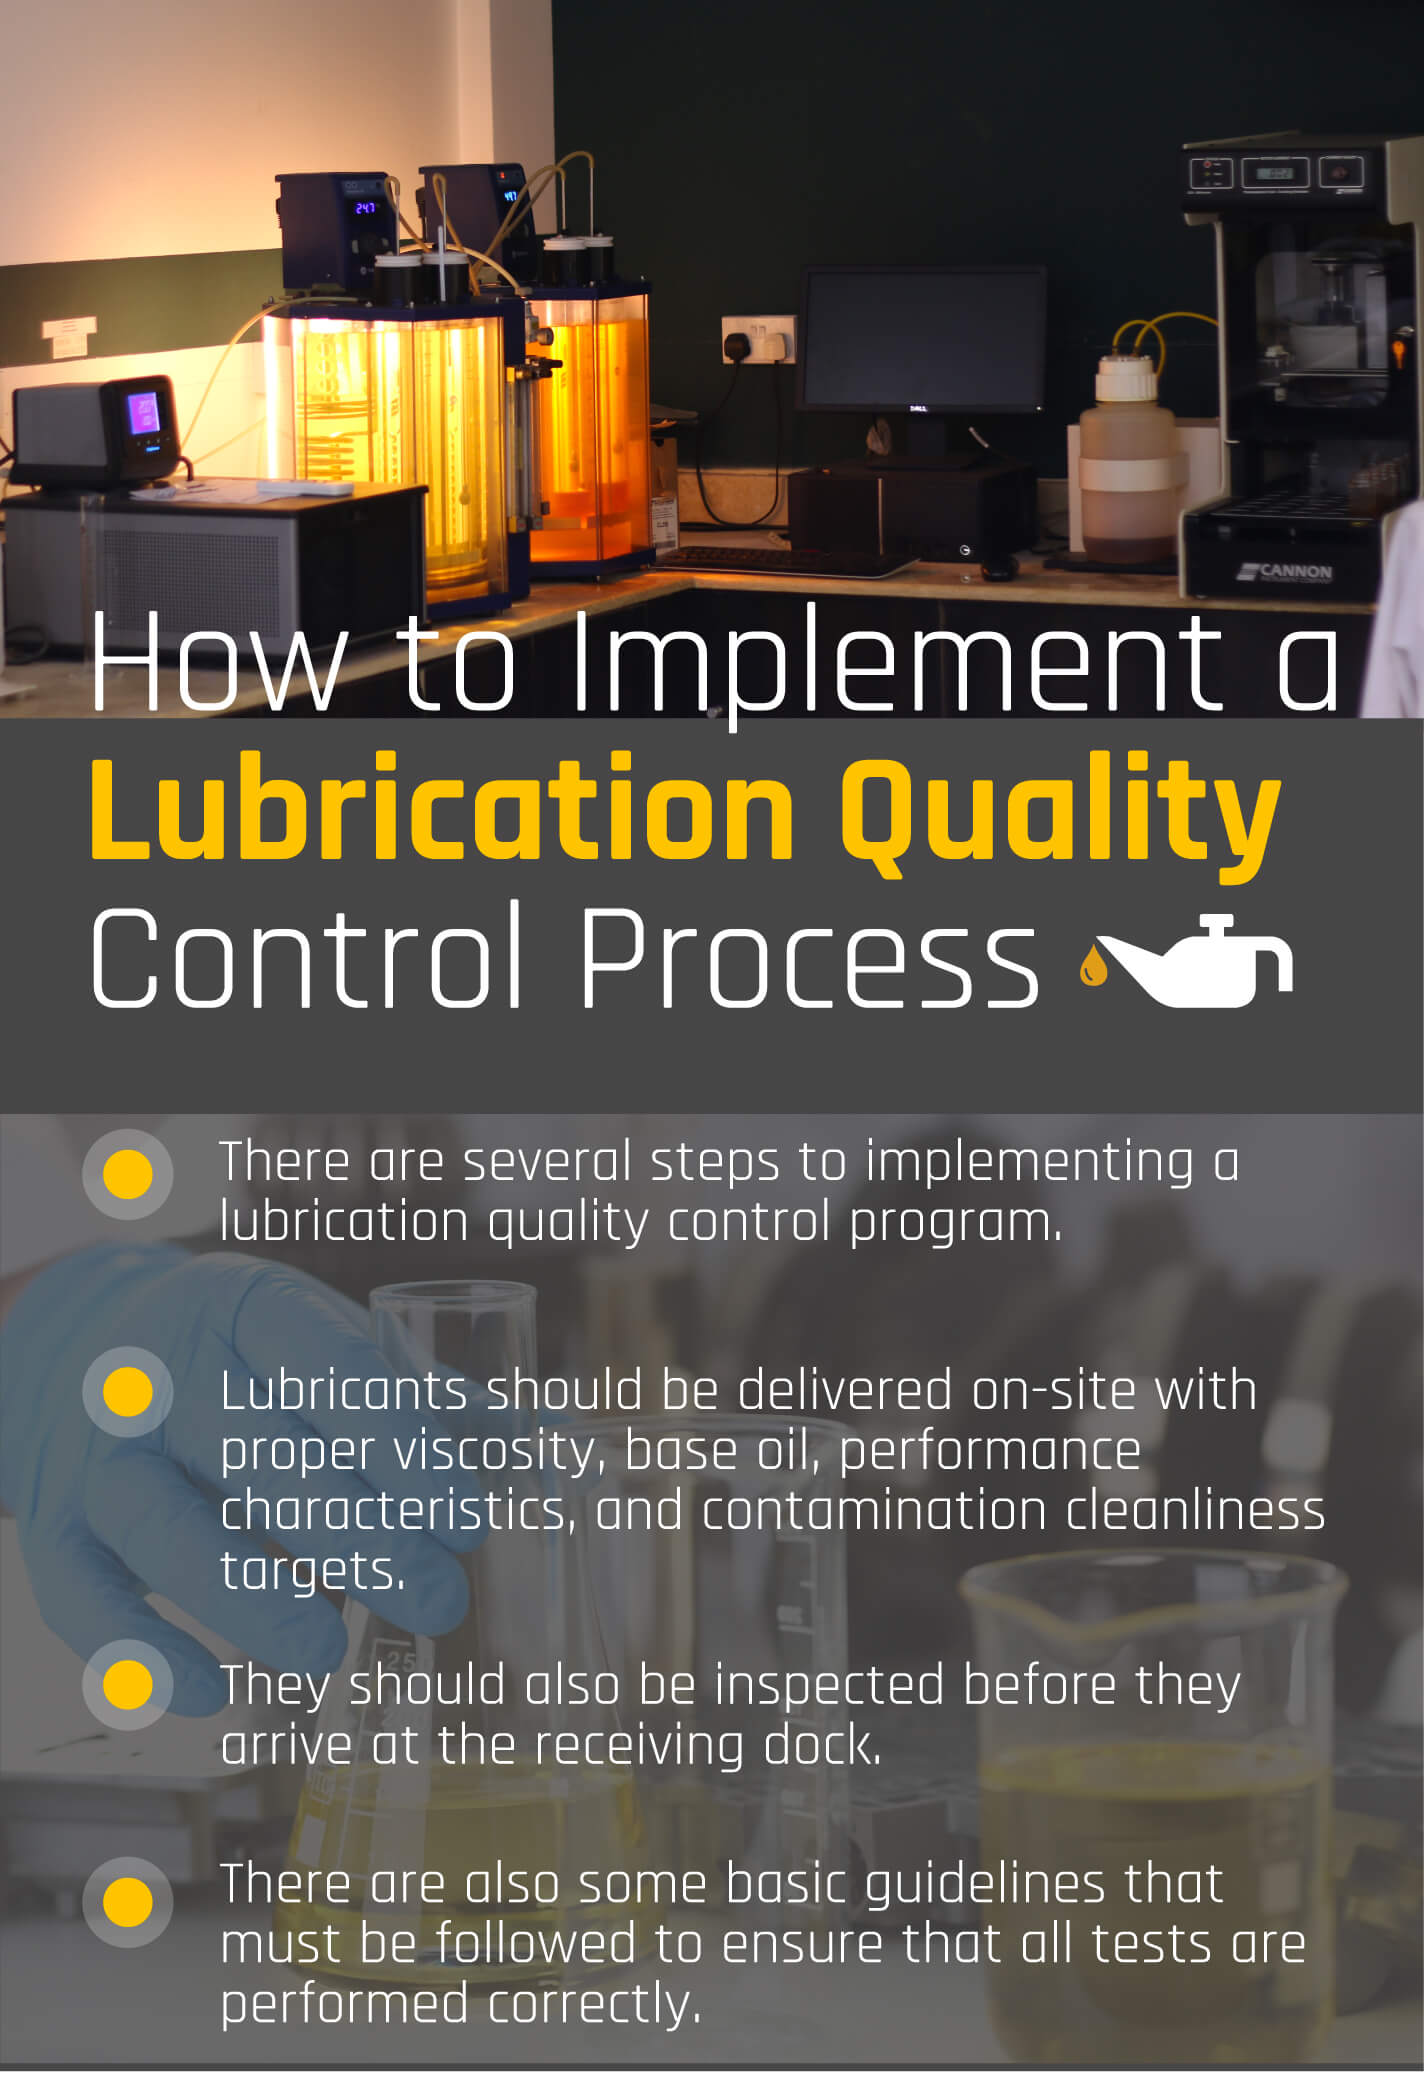 Steps to implement lubricants quality control process